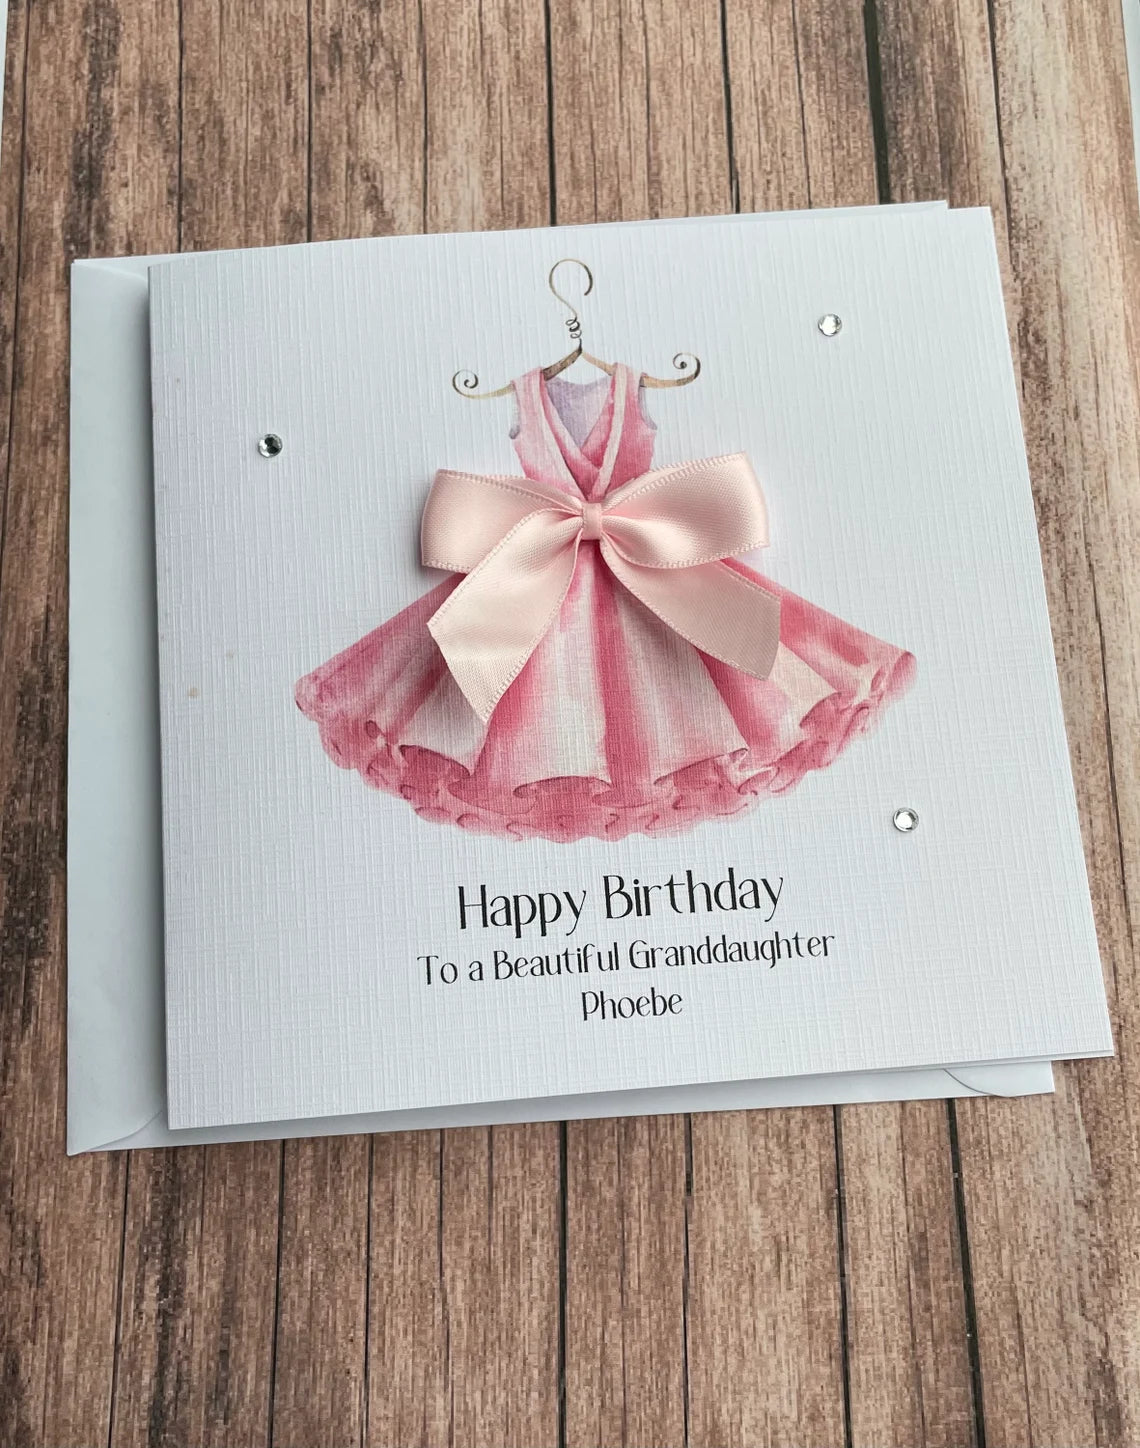 Personalised Ballerina Birthday Card For Her Happy Birthday Daughter Niece Granddaughter Greeting Card Handmade Pretty Girly Card